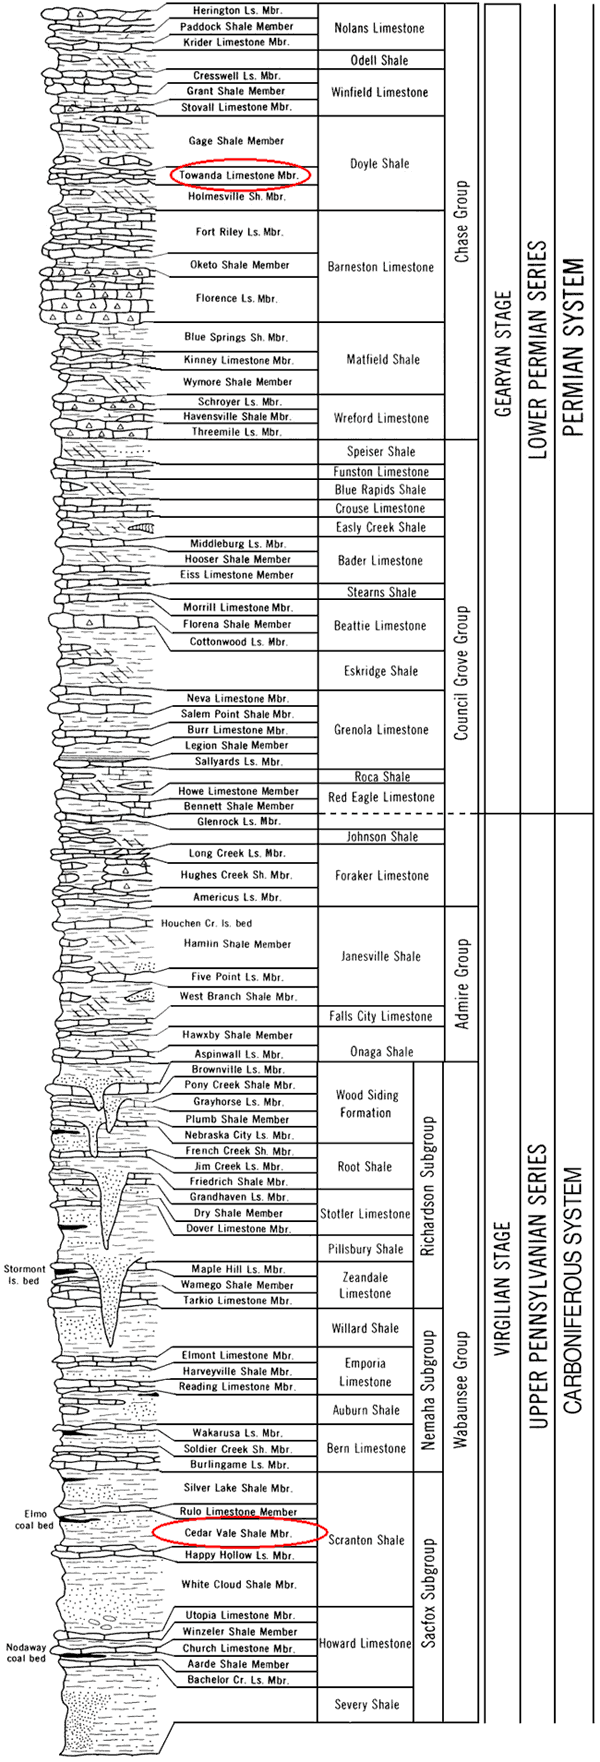 Stratigraphic chart excerpt. Groups found in Pottawatomie County are Chase (lower), Council Grove, Admire, and Wabaunsee (part).